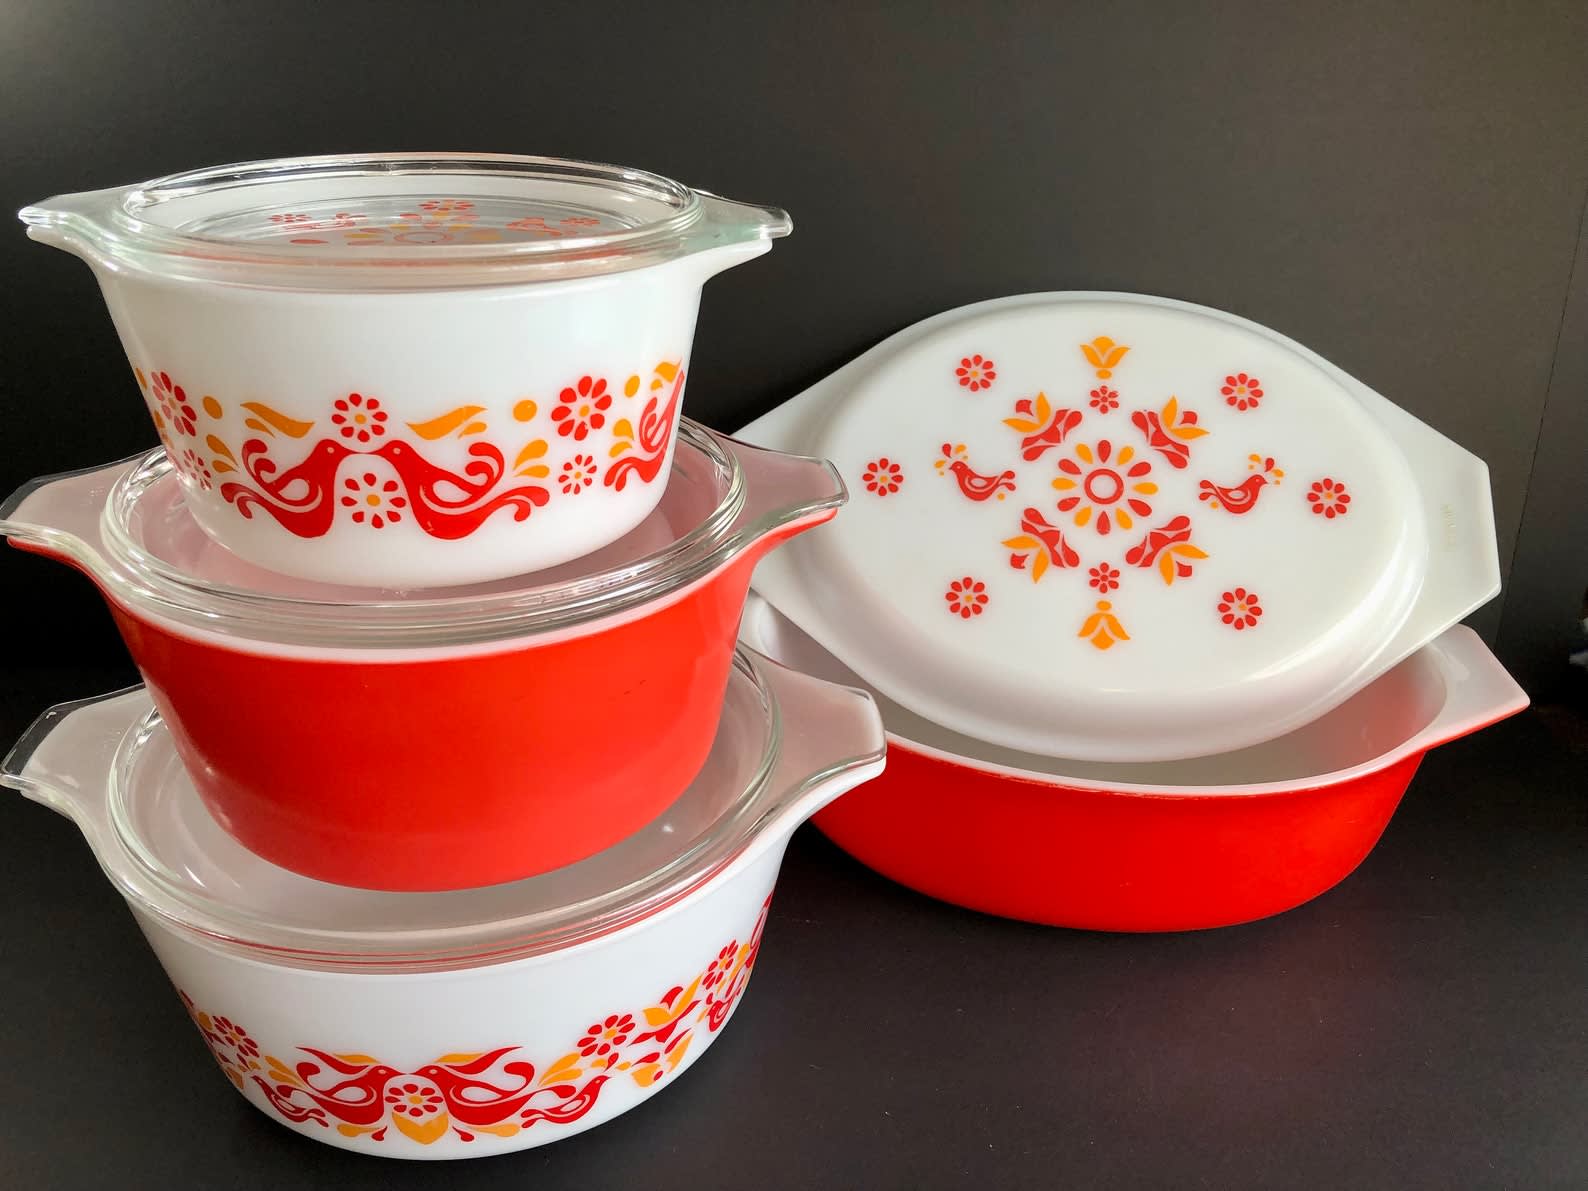 http://cdn.apartmenttherapy.info/image/upload/v1654098989/Vintage%20Set%20of%203%20Stackable%20Casseroles%20and%20Oval%20Dish%20with%20Lids%20Pyrex%20%2C%20Milk%20Glass%20Friendship%20Birds%20Pattern.jpg